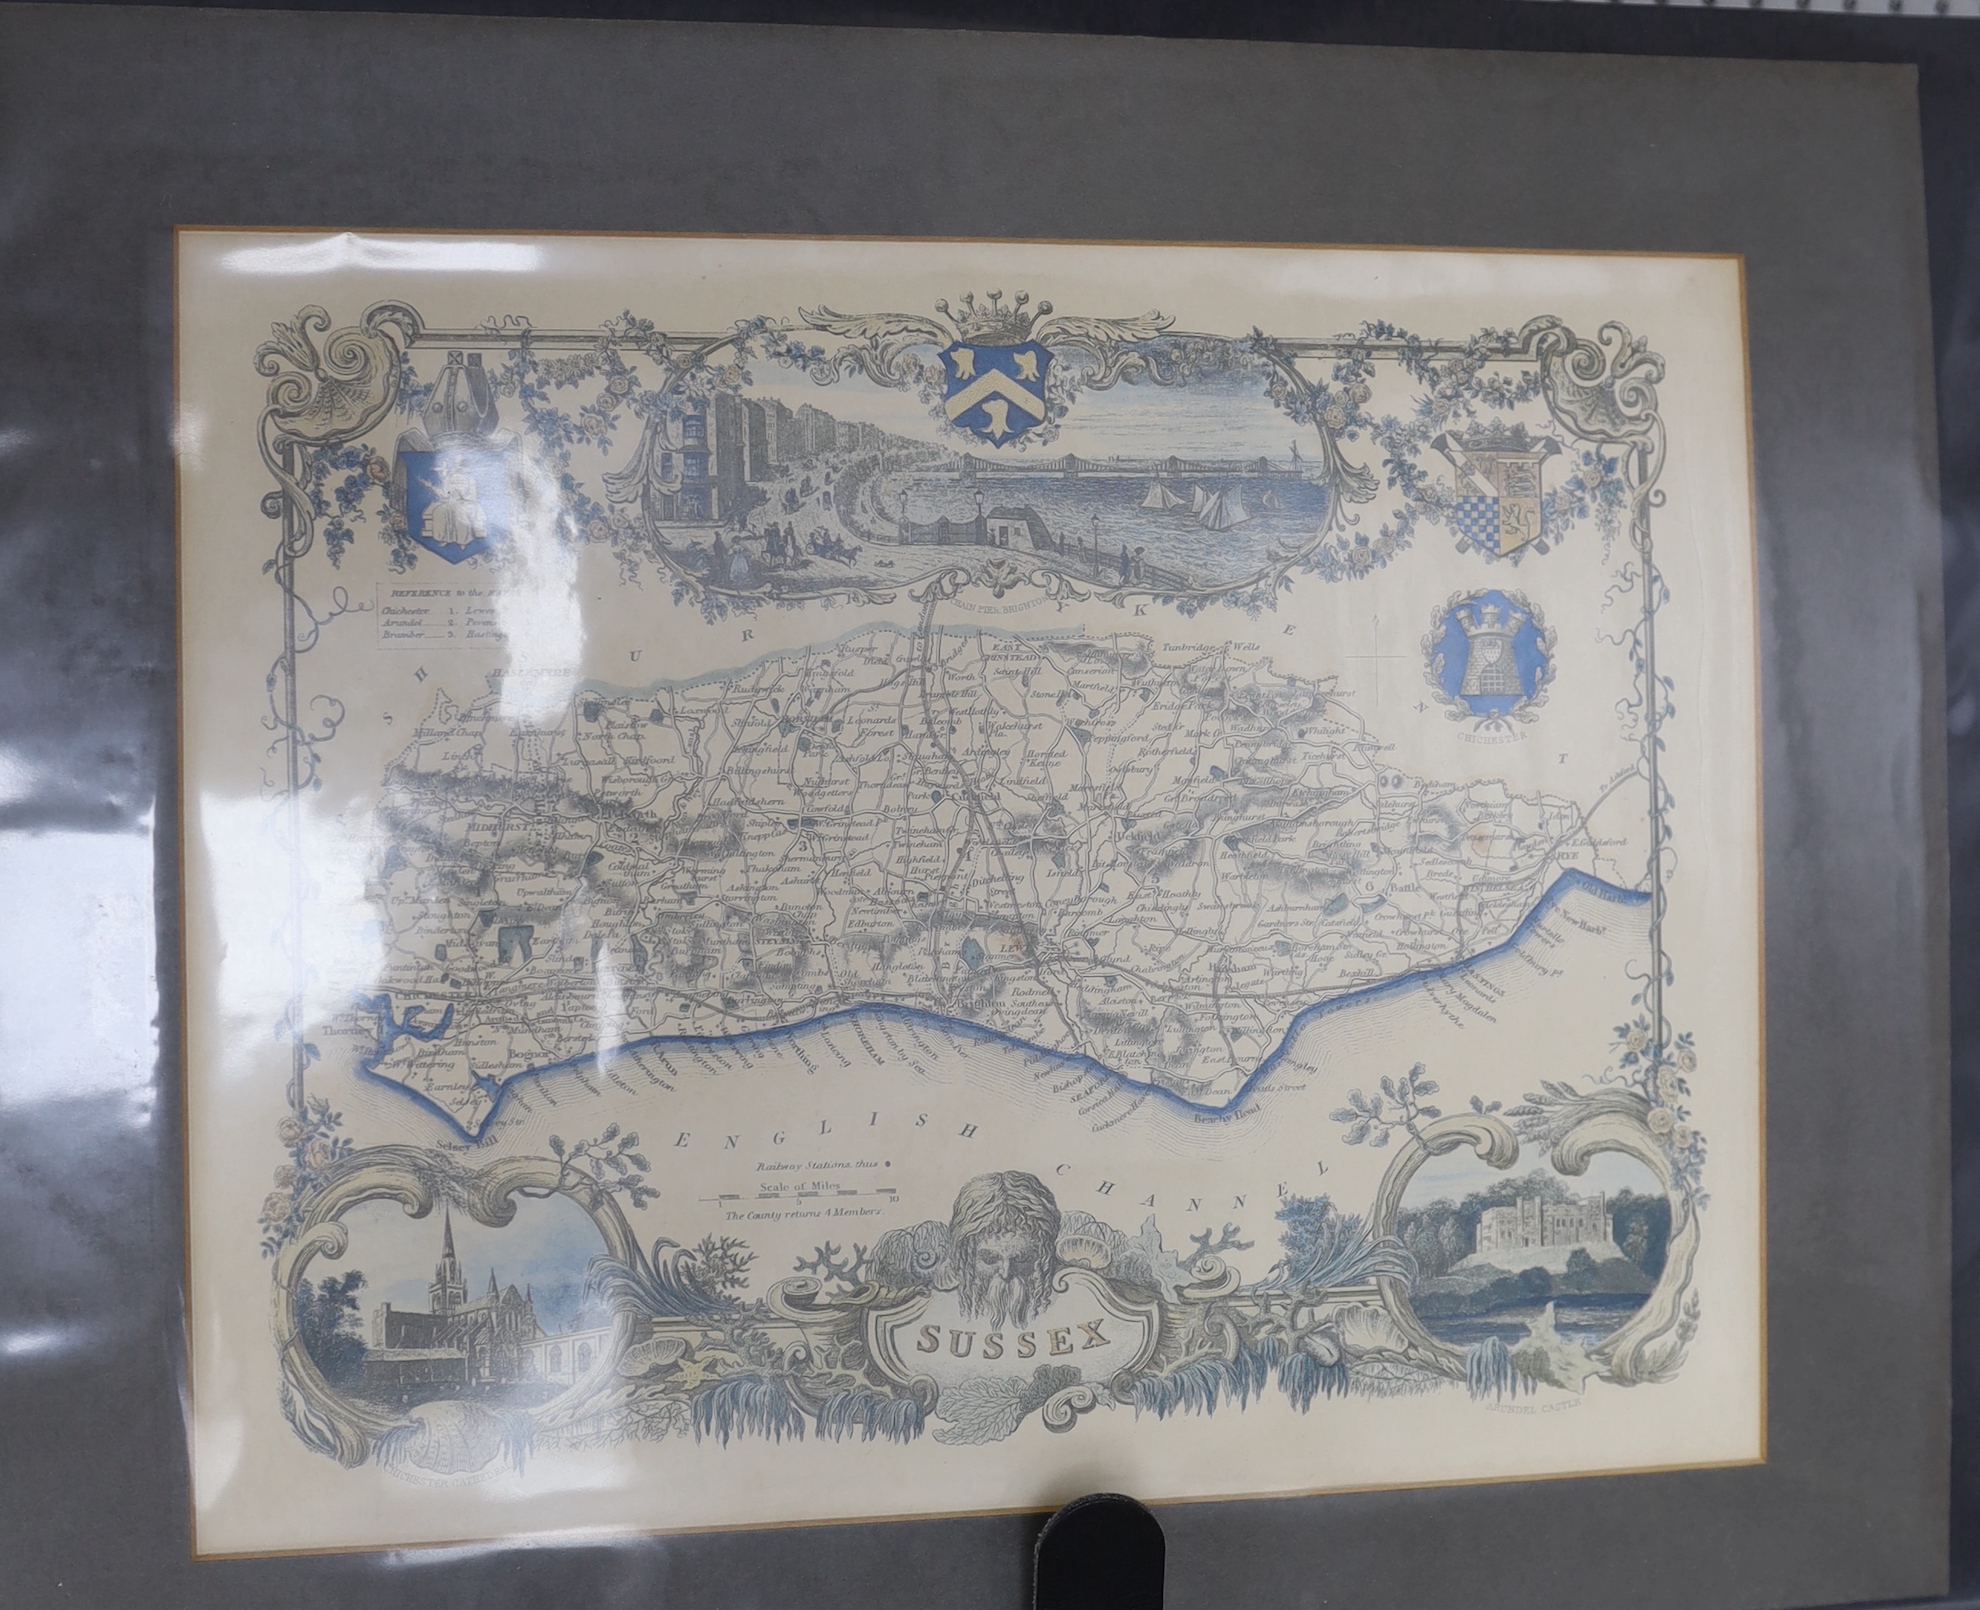 A folder of fifty-two mainly 18th and 19th century maps and charts of Sussex and the related area, including; engravings from books, charts of distances between towns, etc.